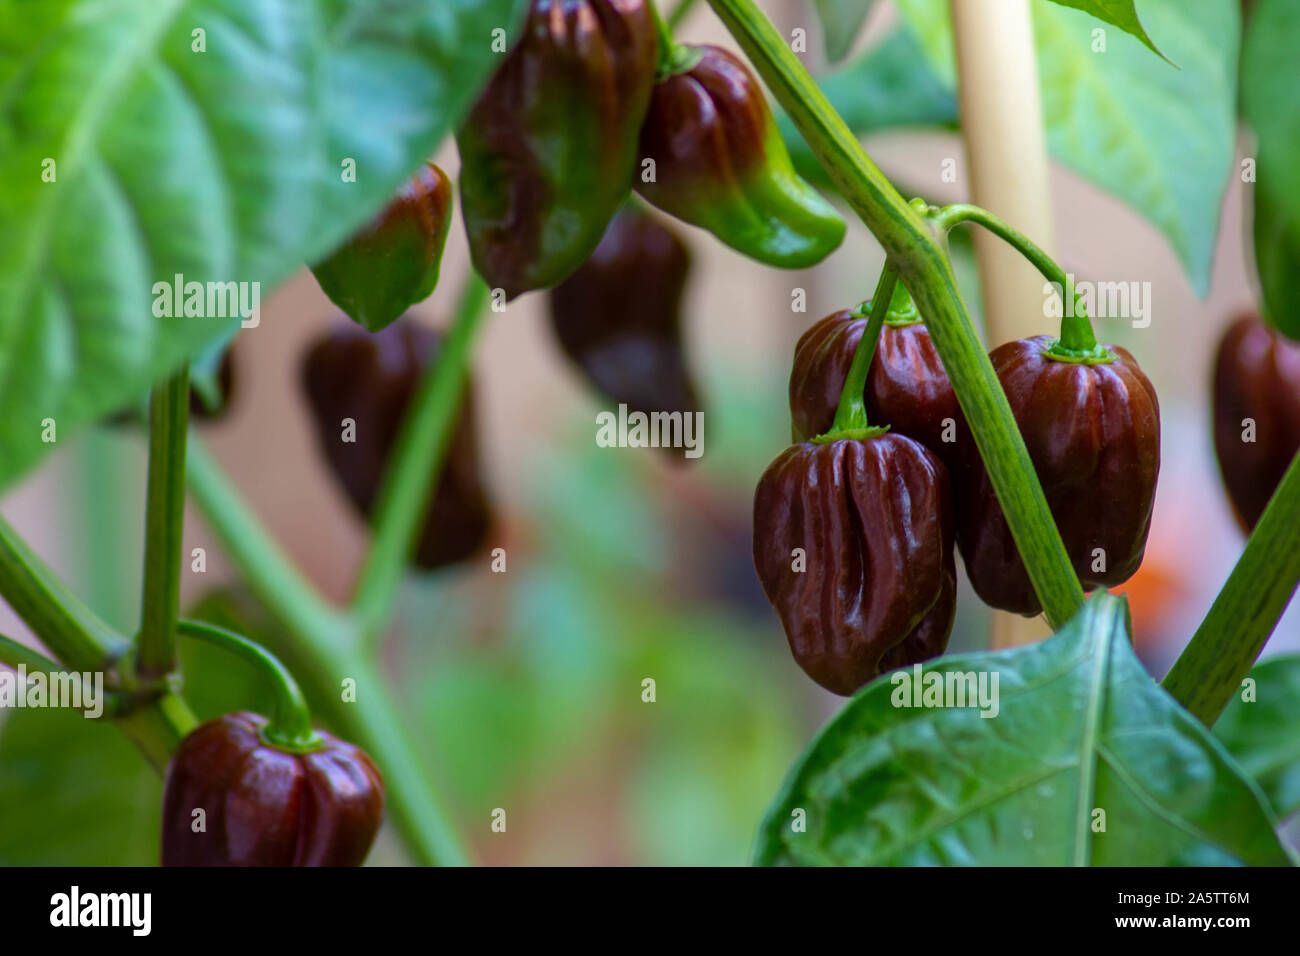 Group of chocolate habanero peppers (Capsicum chinense) on a habanero plant. Chocolate brown hot chili peppers. Tasty paprika, one of the hottest. Stock Photo